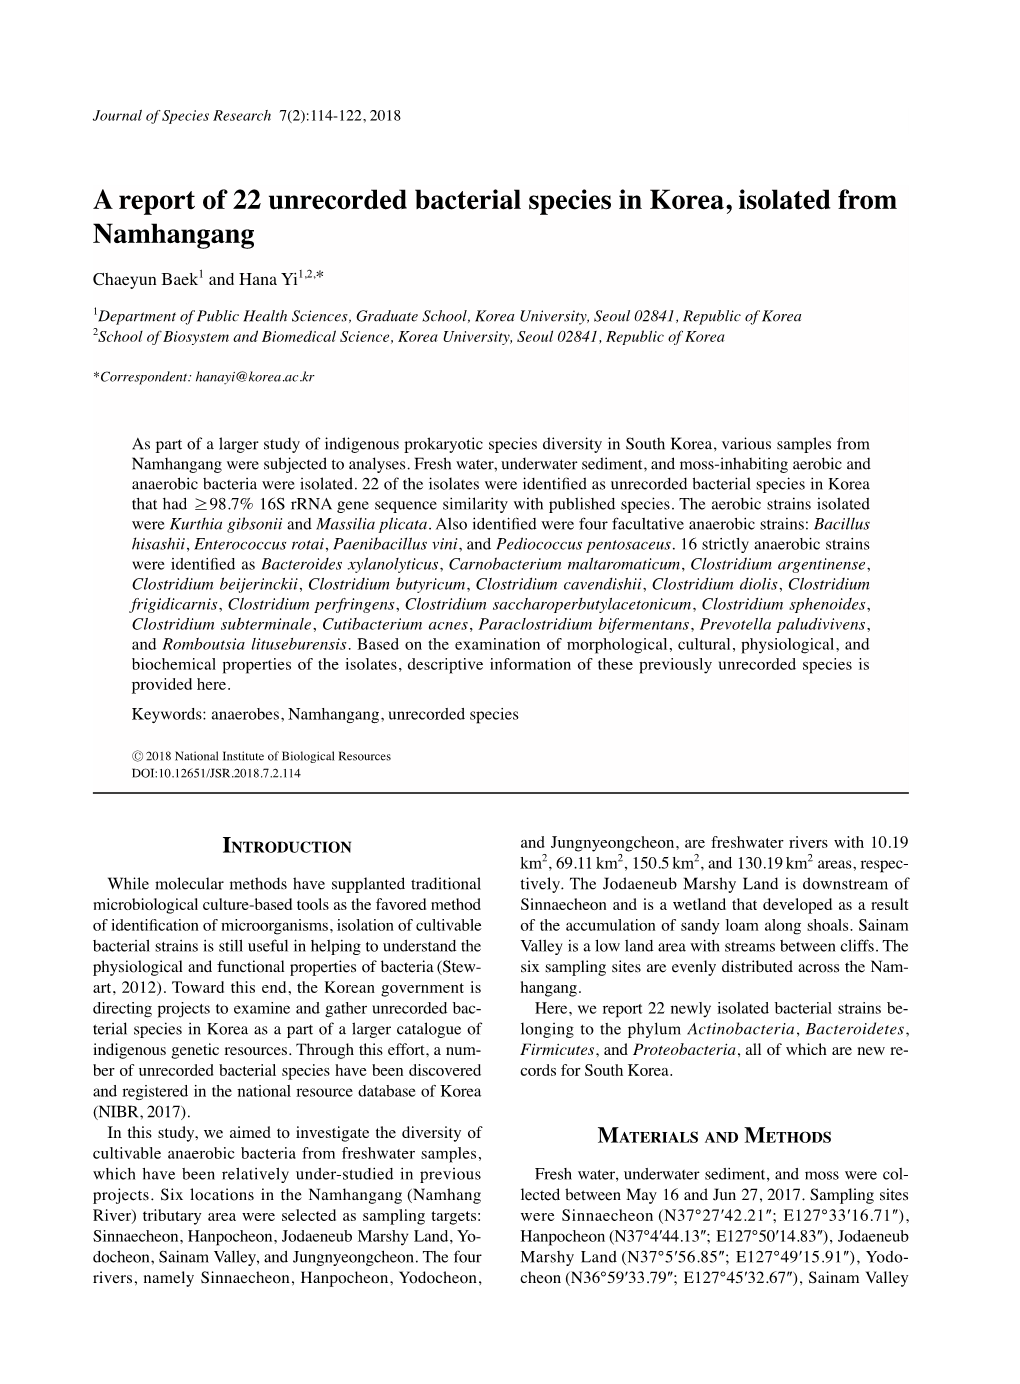 A Report of 22 Unrecorded Bacterial Species in Korea, Isolated from Namhangang